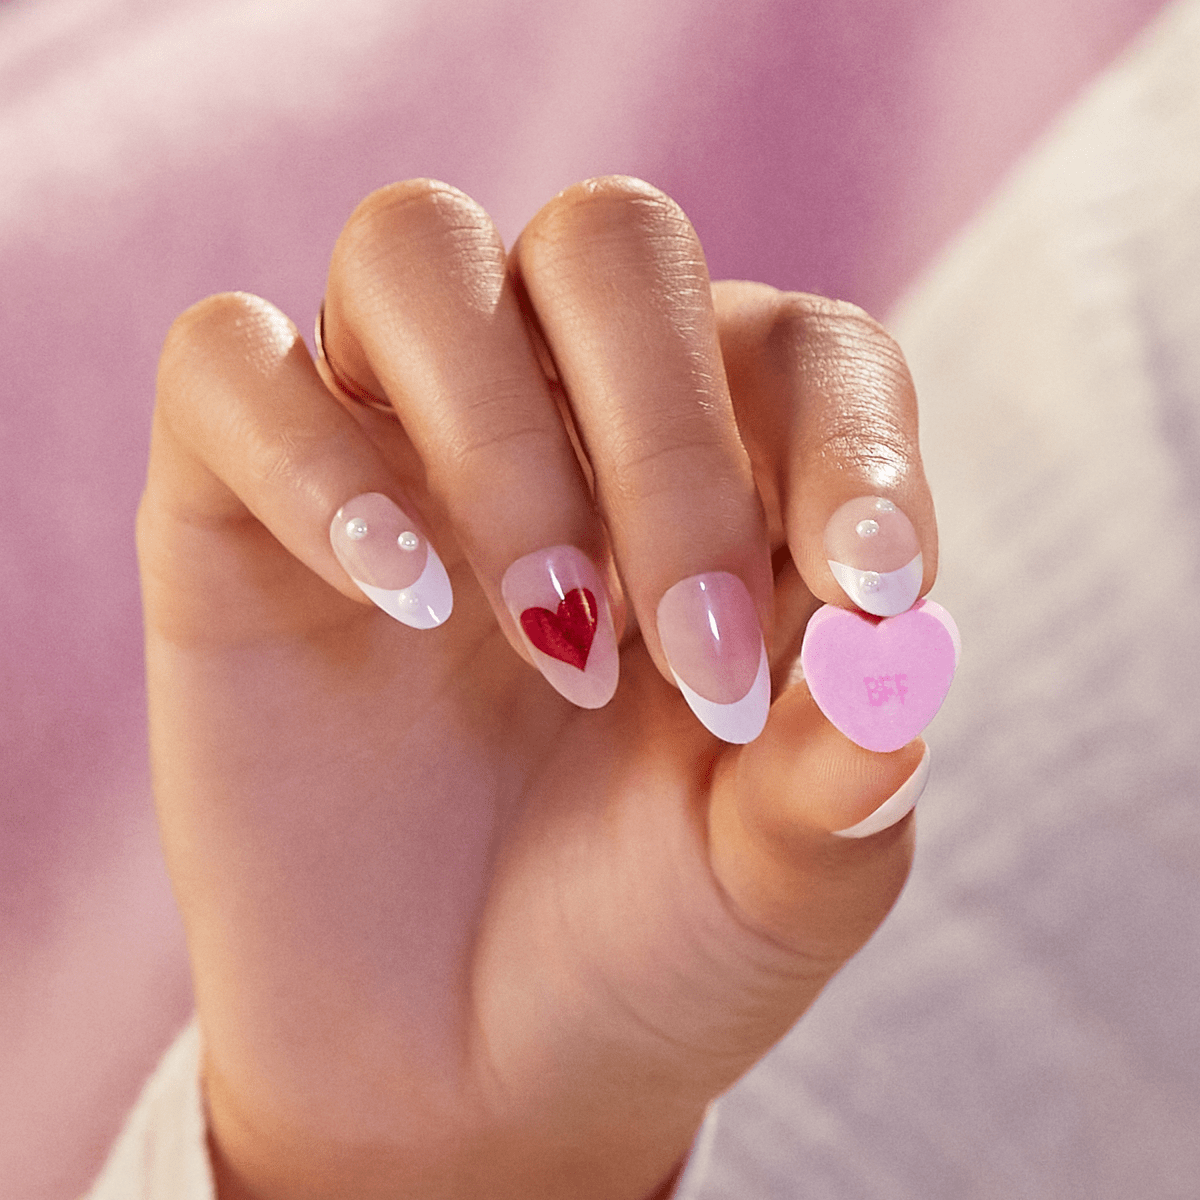 There's Still Time, Valentine - Totally Nail Supplies